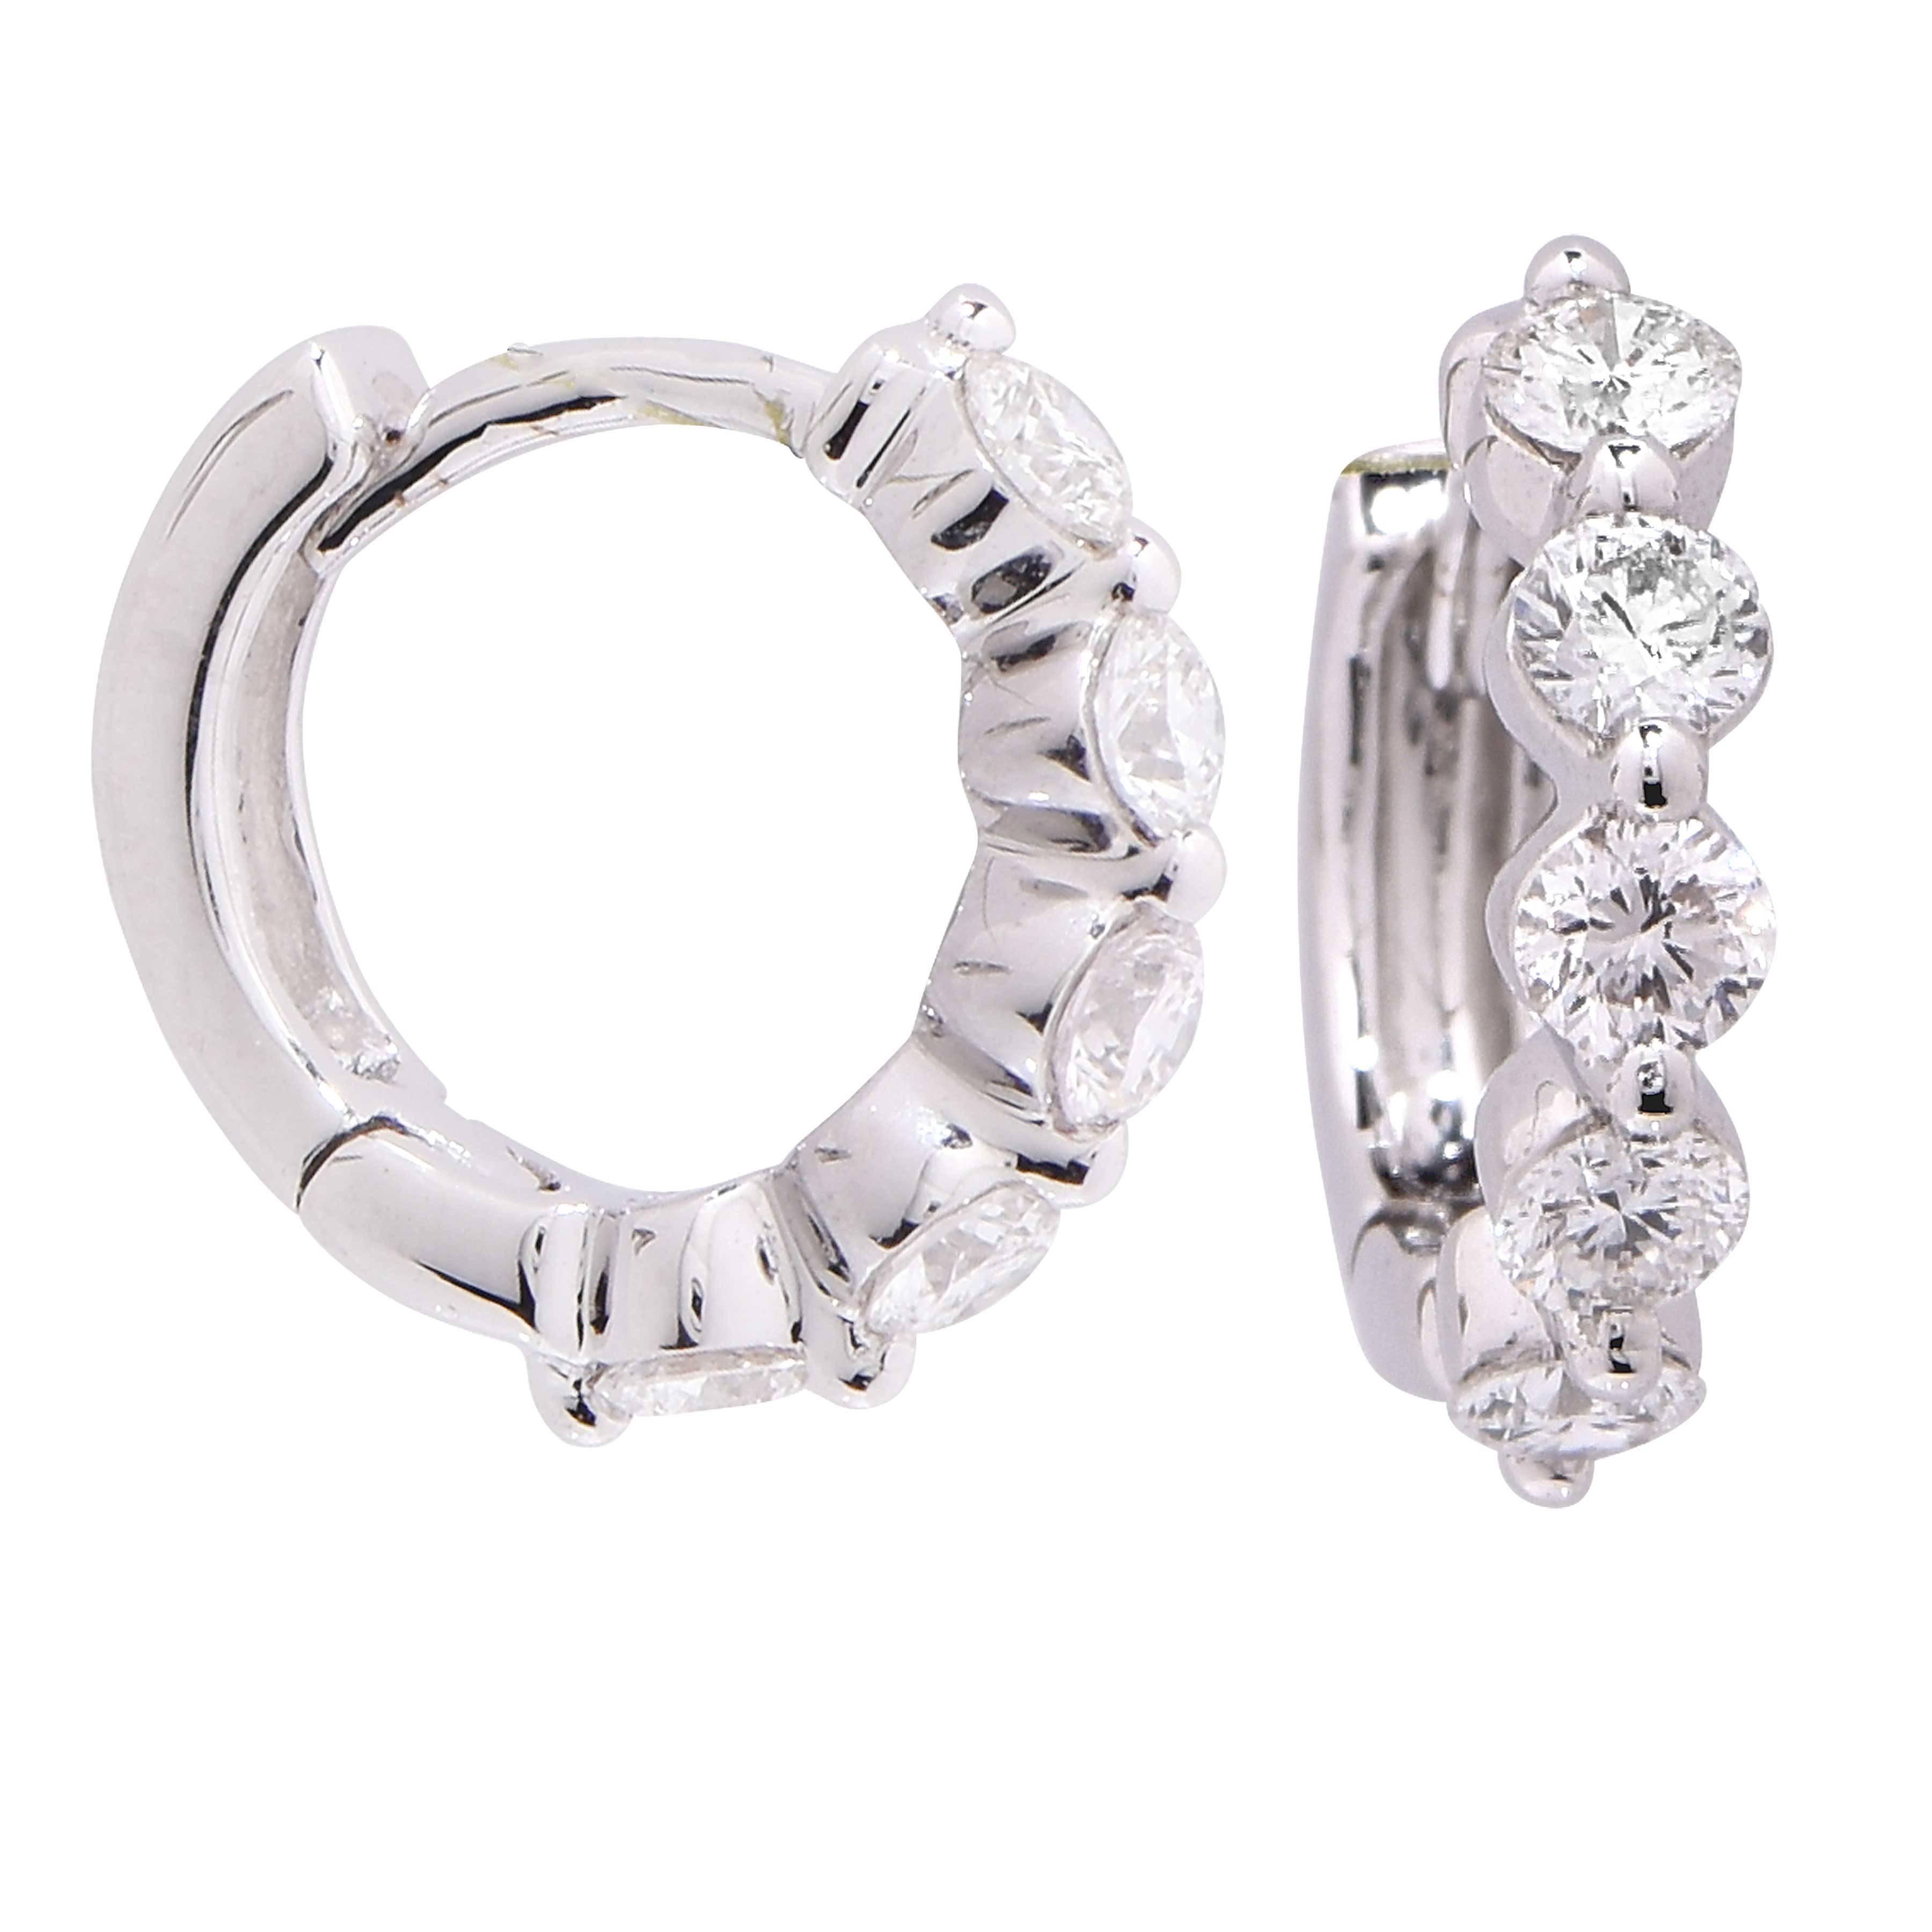 Small Diamond hoop earrings featuring 10 round brilliant cut diamonds with an estimated total weight of .6 carat set in 18 Karat White Gold.

Metal Type: 8 Karat White Gold Stamped or Tested
Metal Weight: 2 Grams